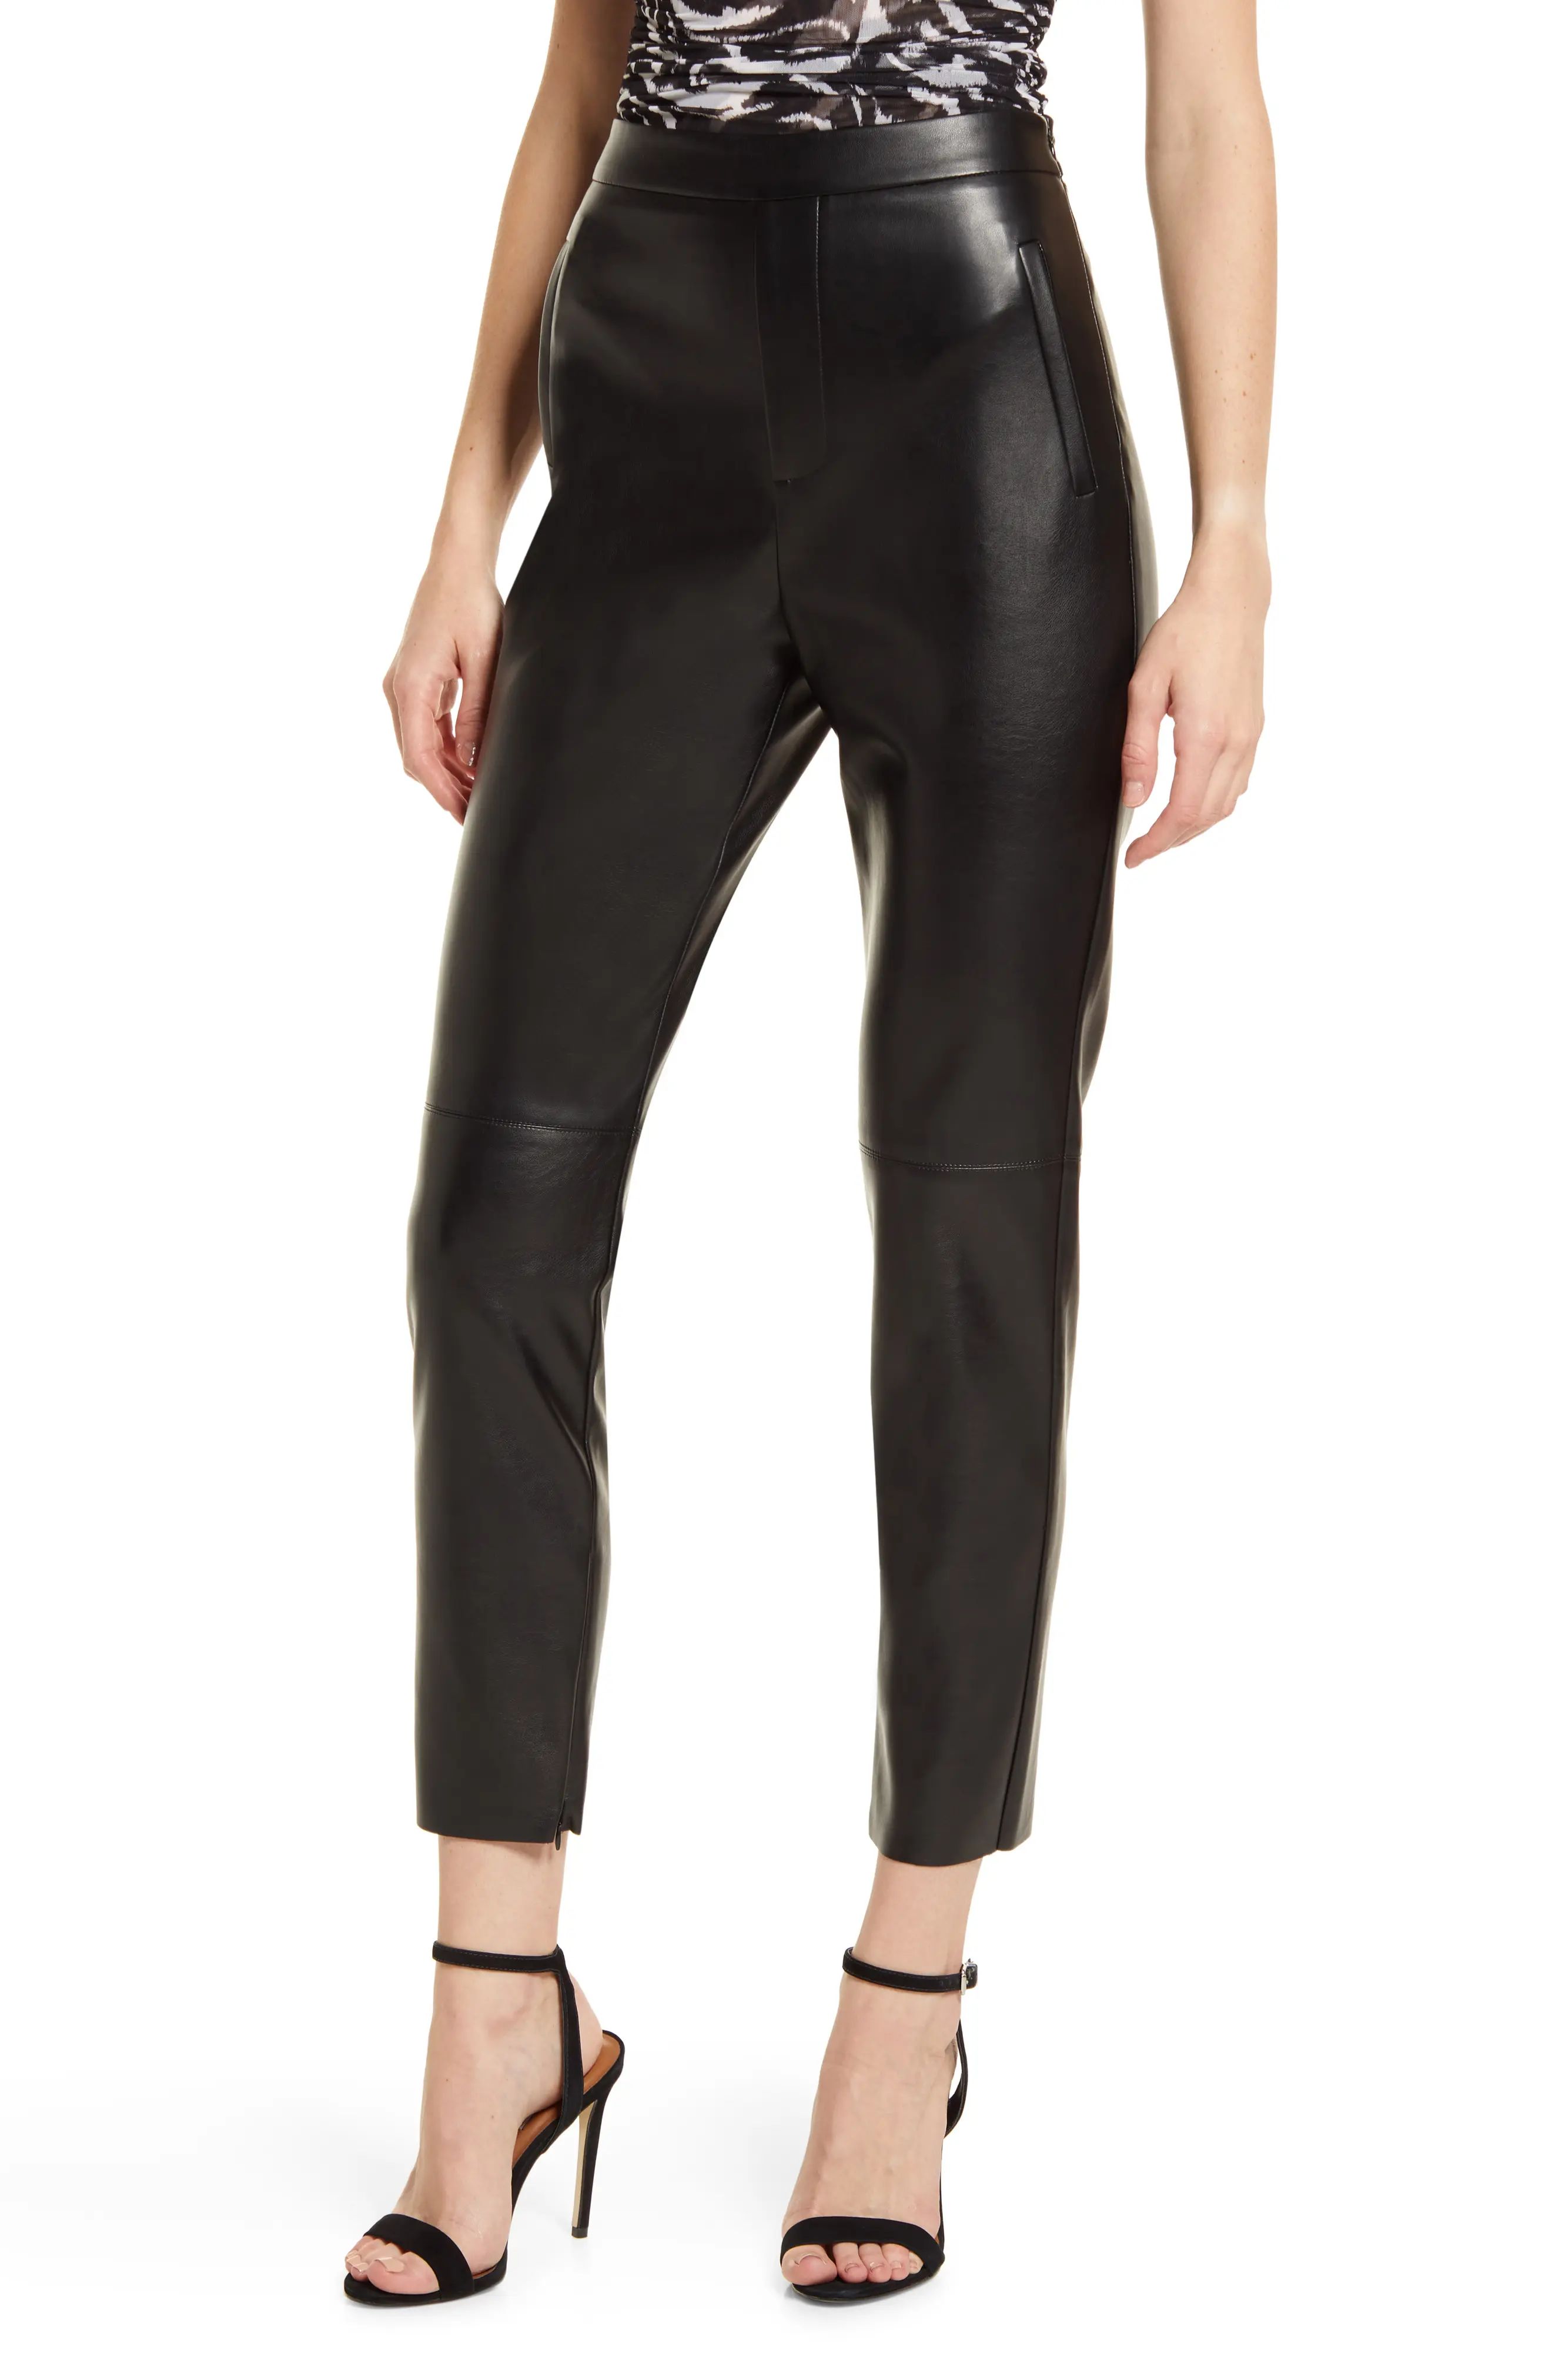 Lulus Keep Your Stride Faux Leather Pants in Black at Nordstrom, Size Small | Nordstrom